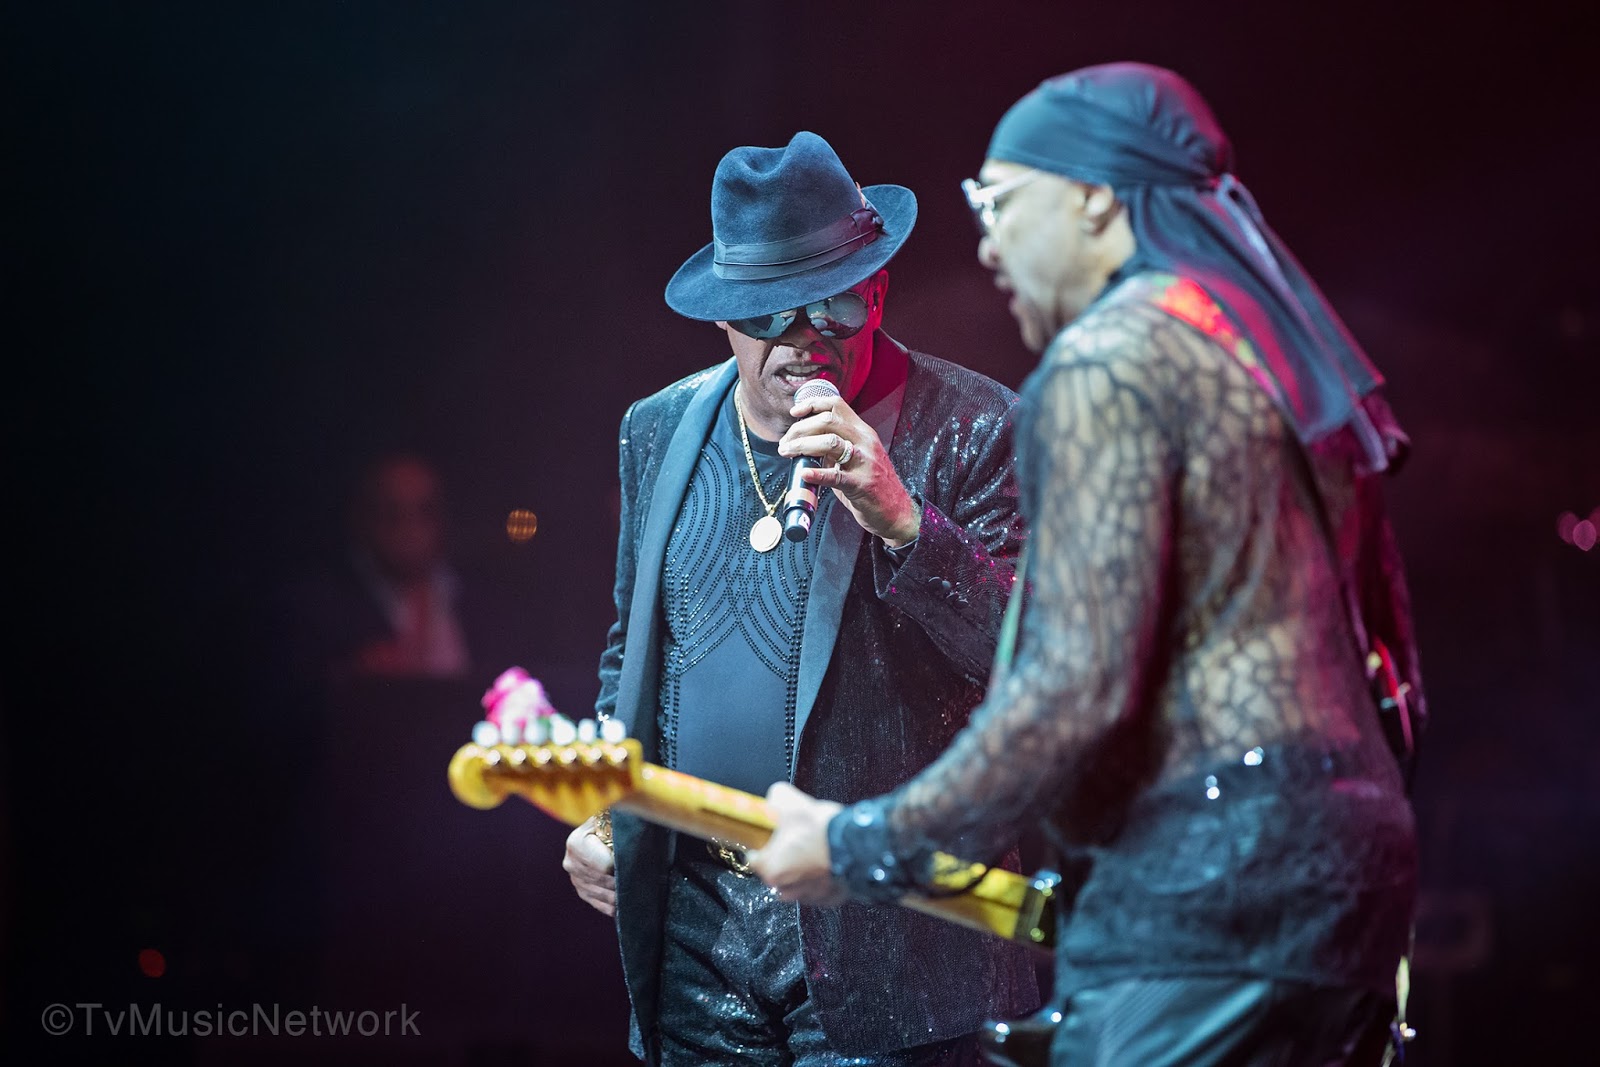 Photos: The Isley Brothers and The Commodores in concert at the Pacific